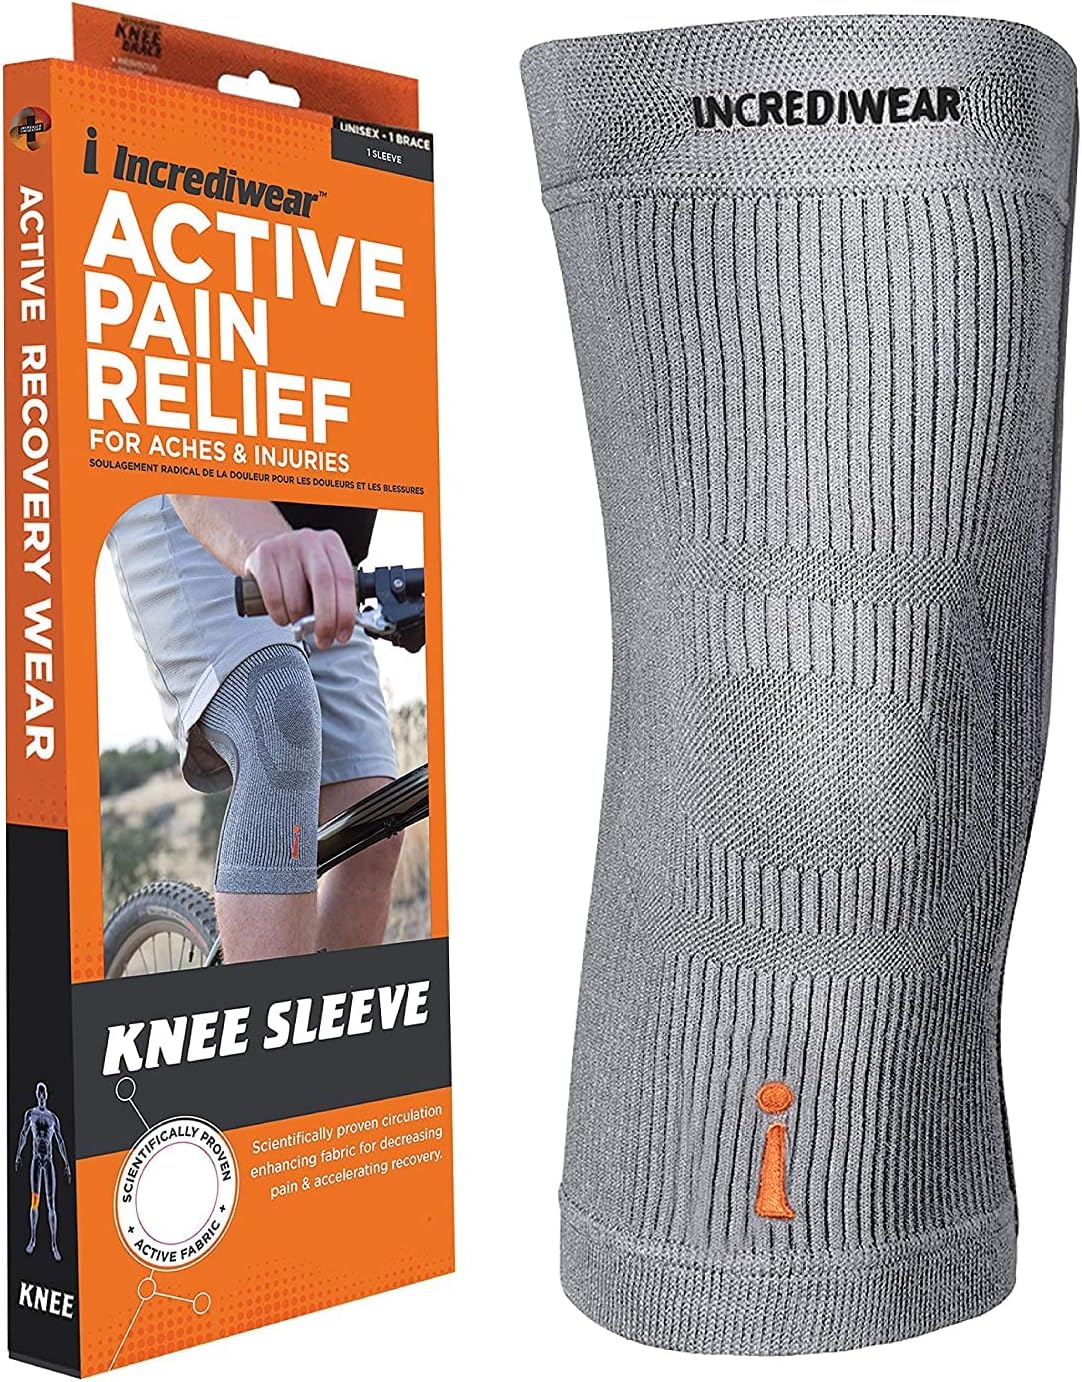 Incrediwear Knee Sleeve Review: Relieve Knee Pain and Improve Circulation